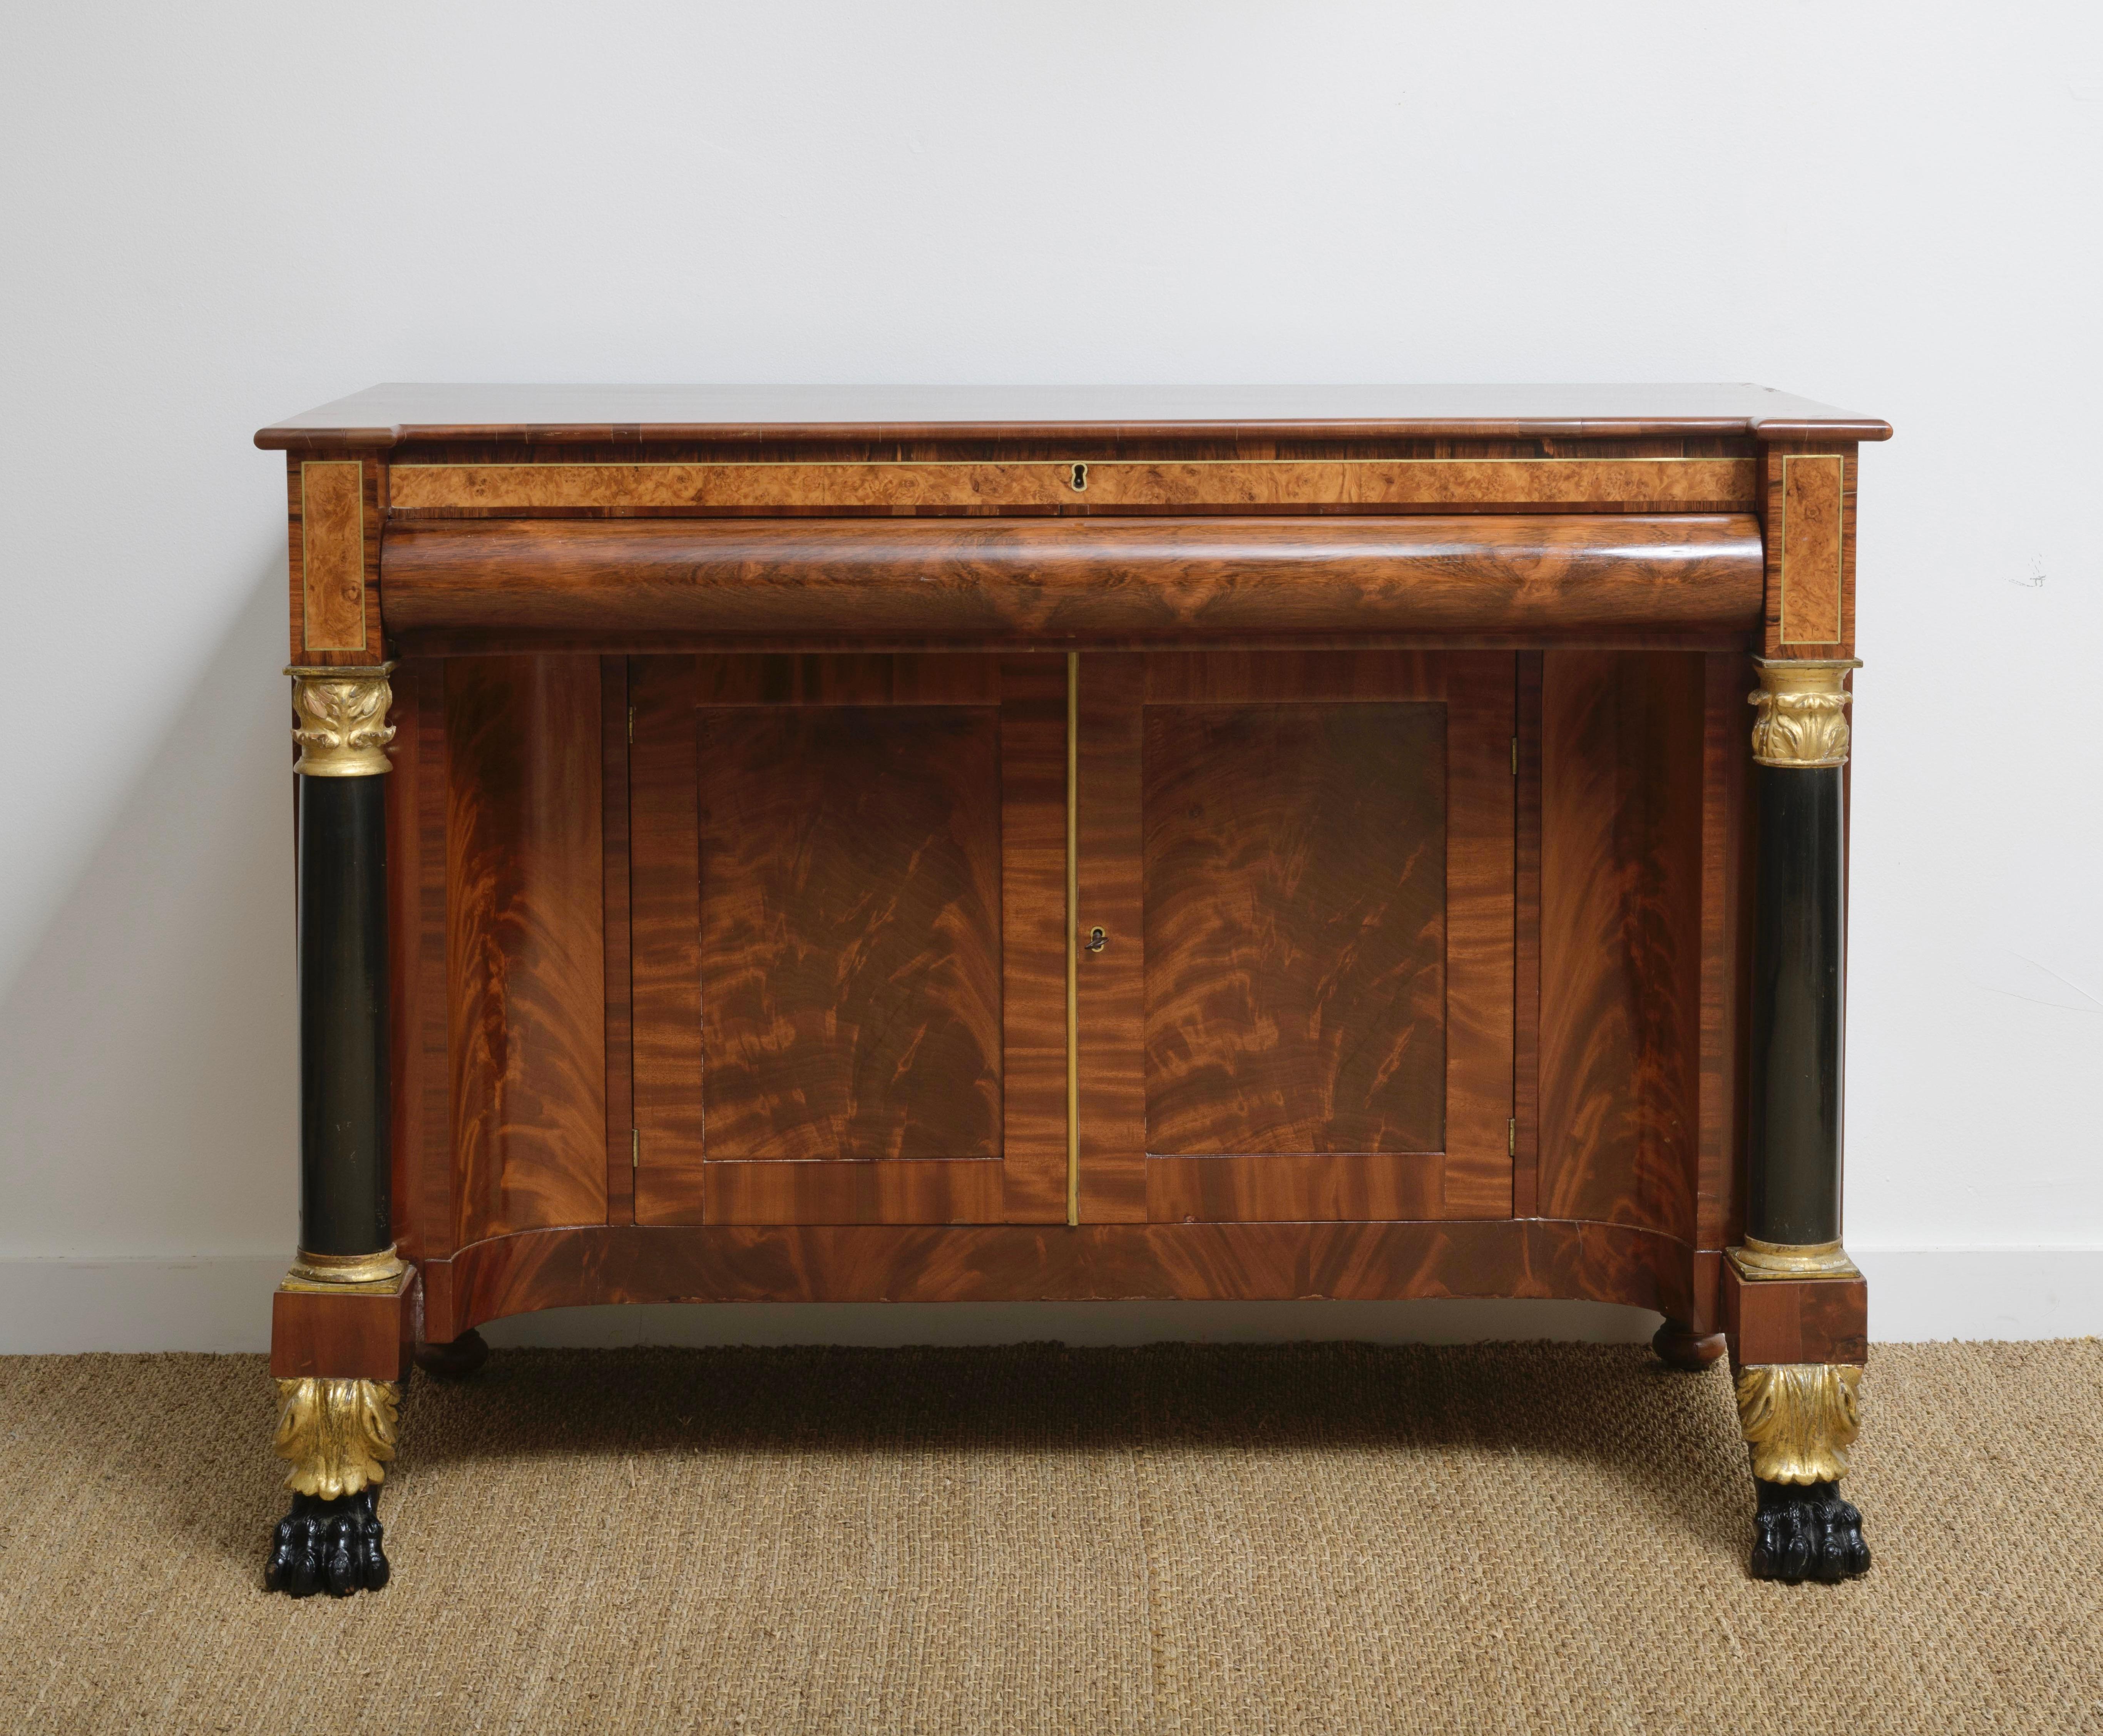 Unusual 1st Empire desk,  circa 1810, in mahogany, Burl, with Brass inlay and blackened columns ending on 2 blackened lion's feet above gilded leaves . 
Center drawer pulls out to reveal hinged writing surface with fitted drawer.  All above a curved